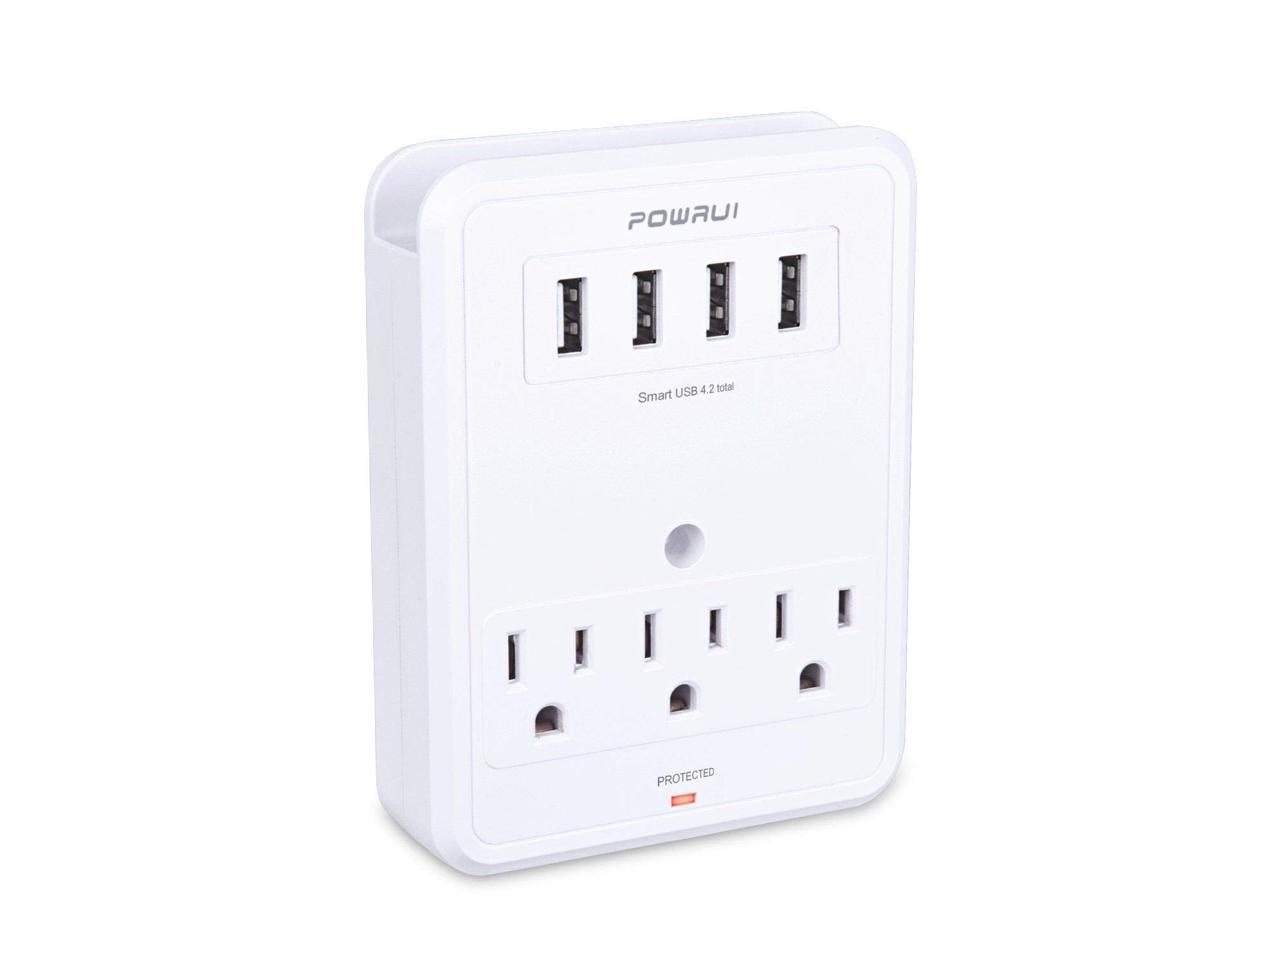 Outlet Extender with Night Light 1680 Joules Multi Plug Outlet with Spaced Outlets for Home White POWLIGHT 5-Outlet Surge Protector Power Strip with 4 USB Ports USB Wall Charger Office 